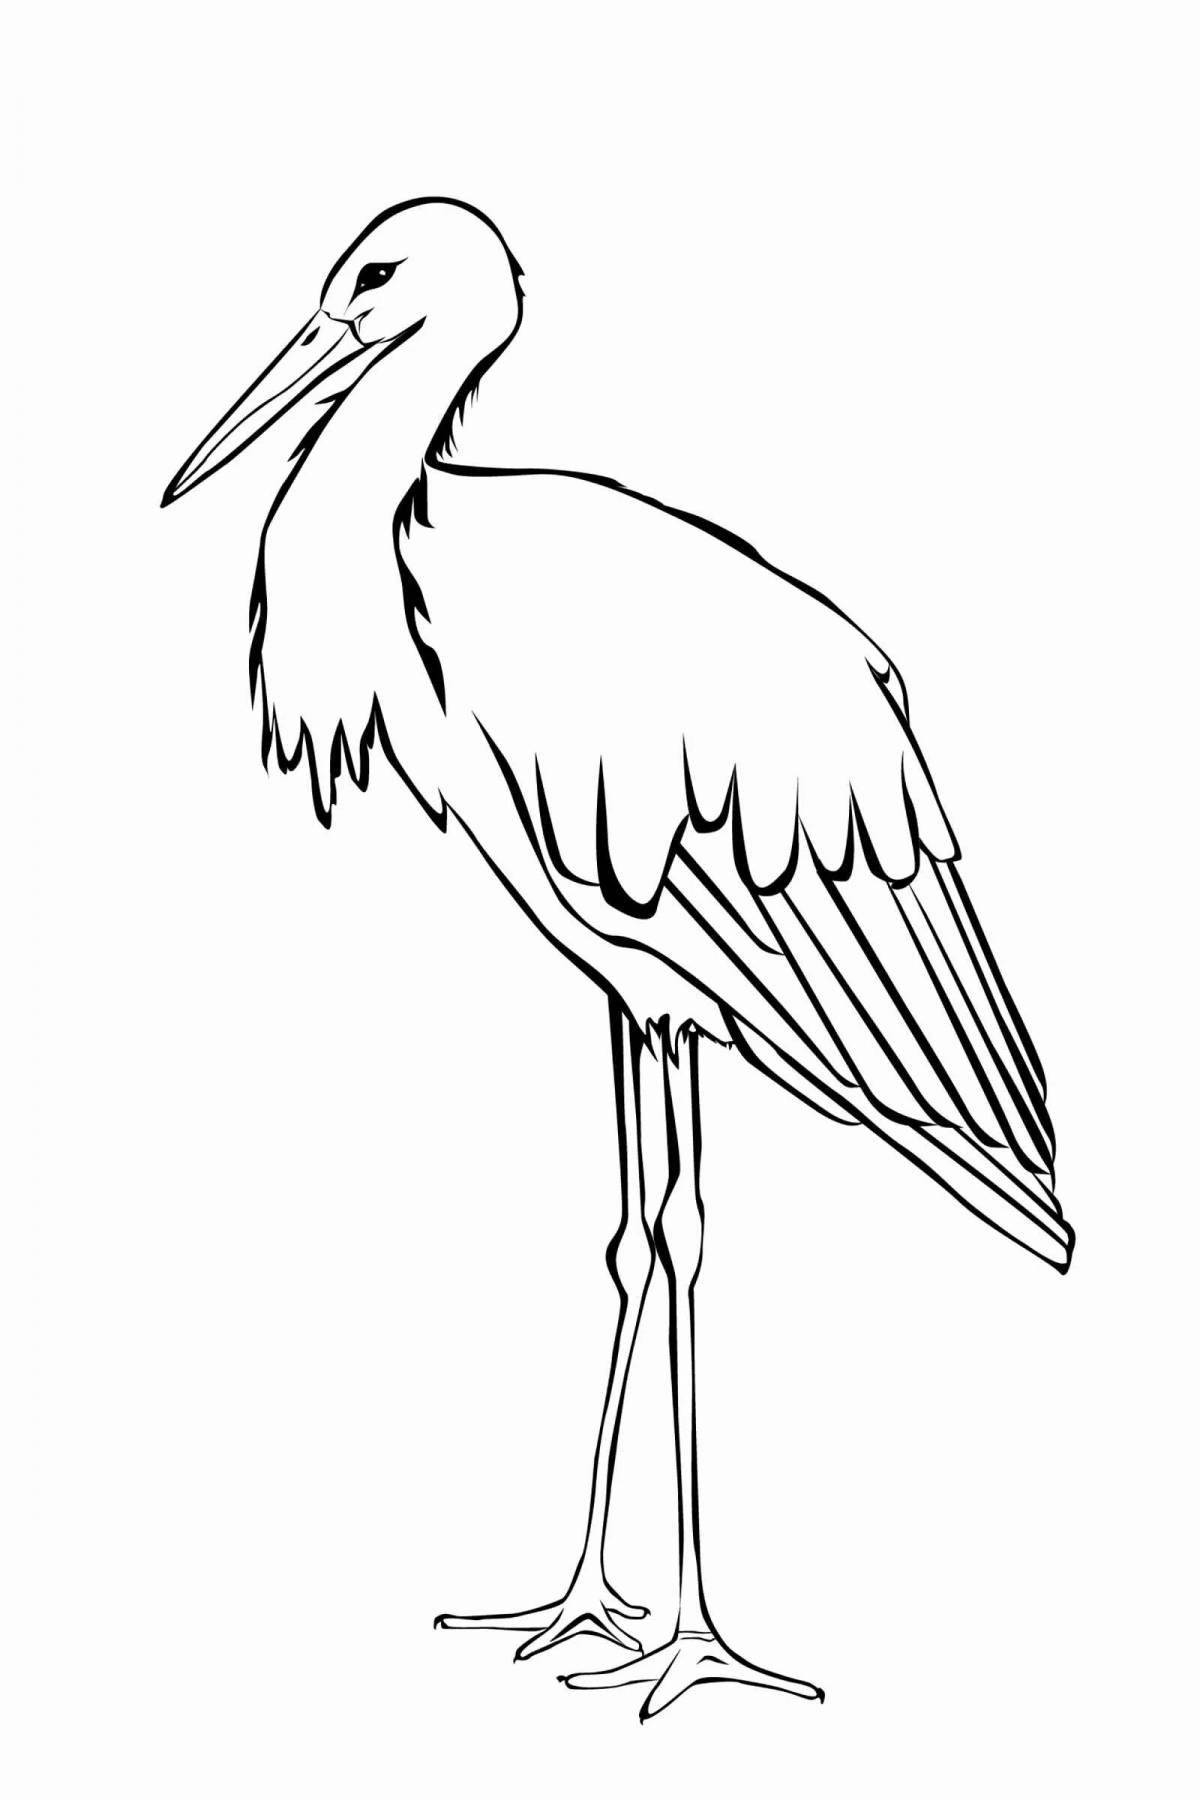 Outstanding black stork coloring page for kids